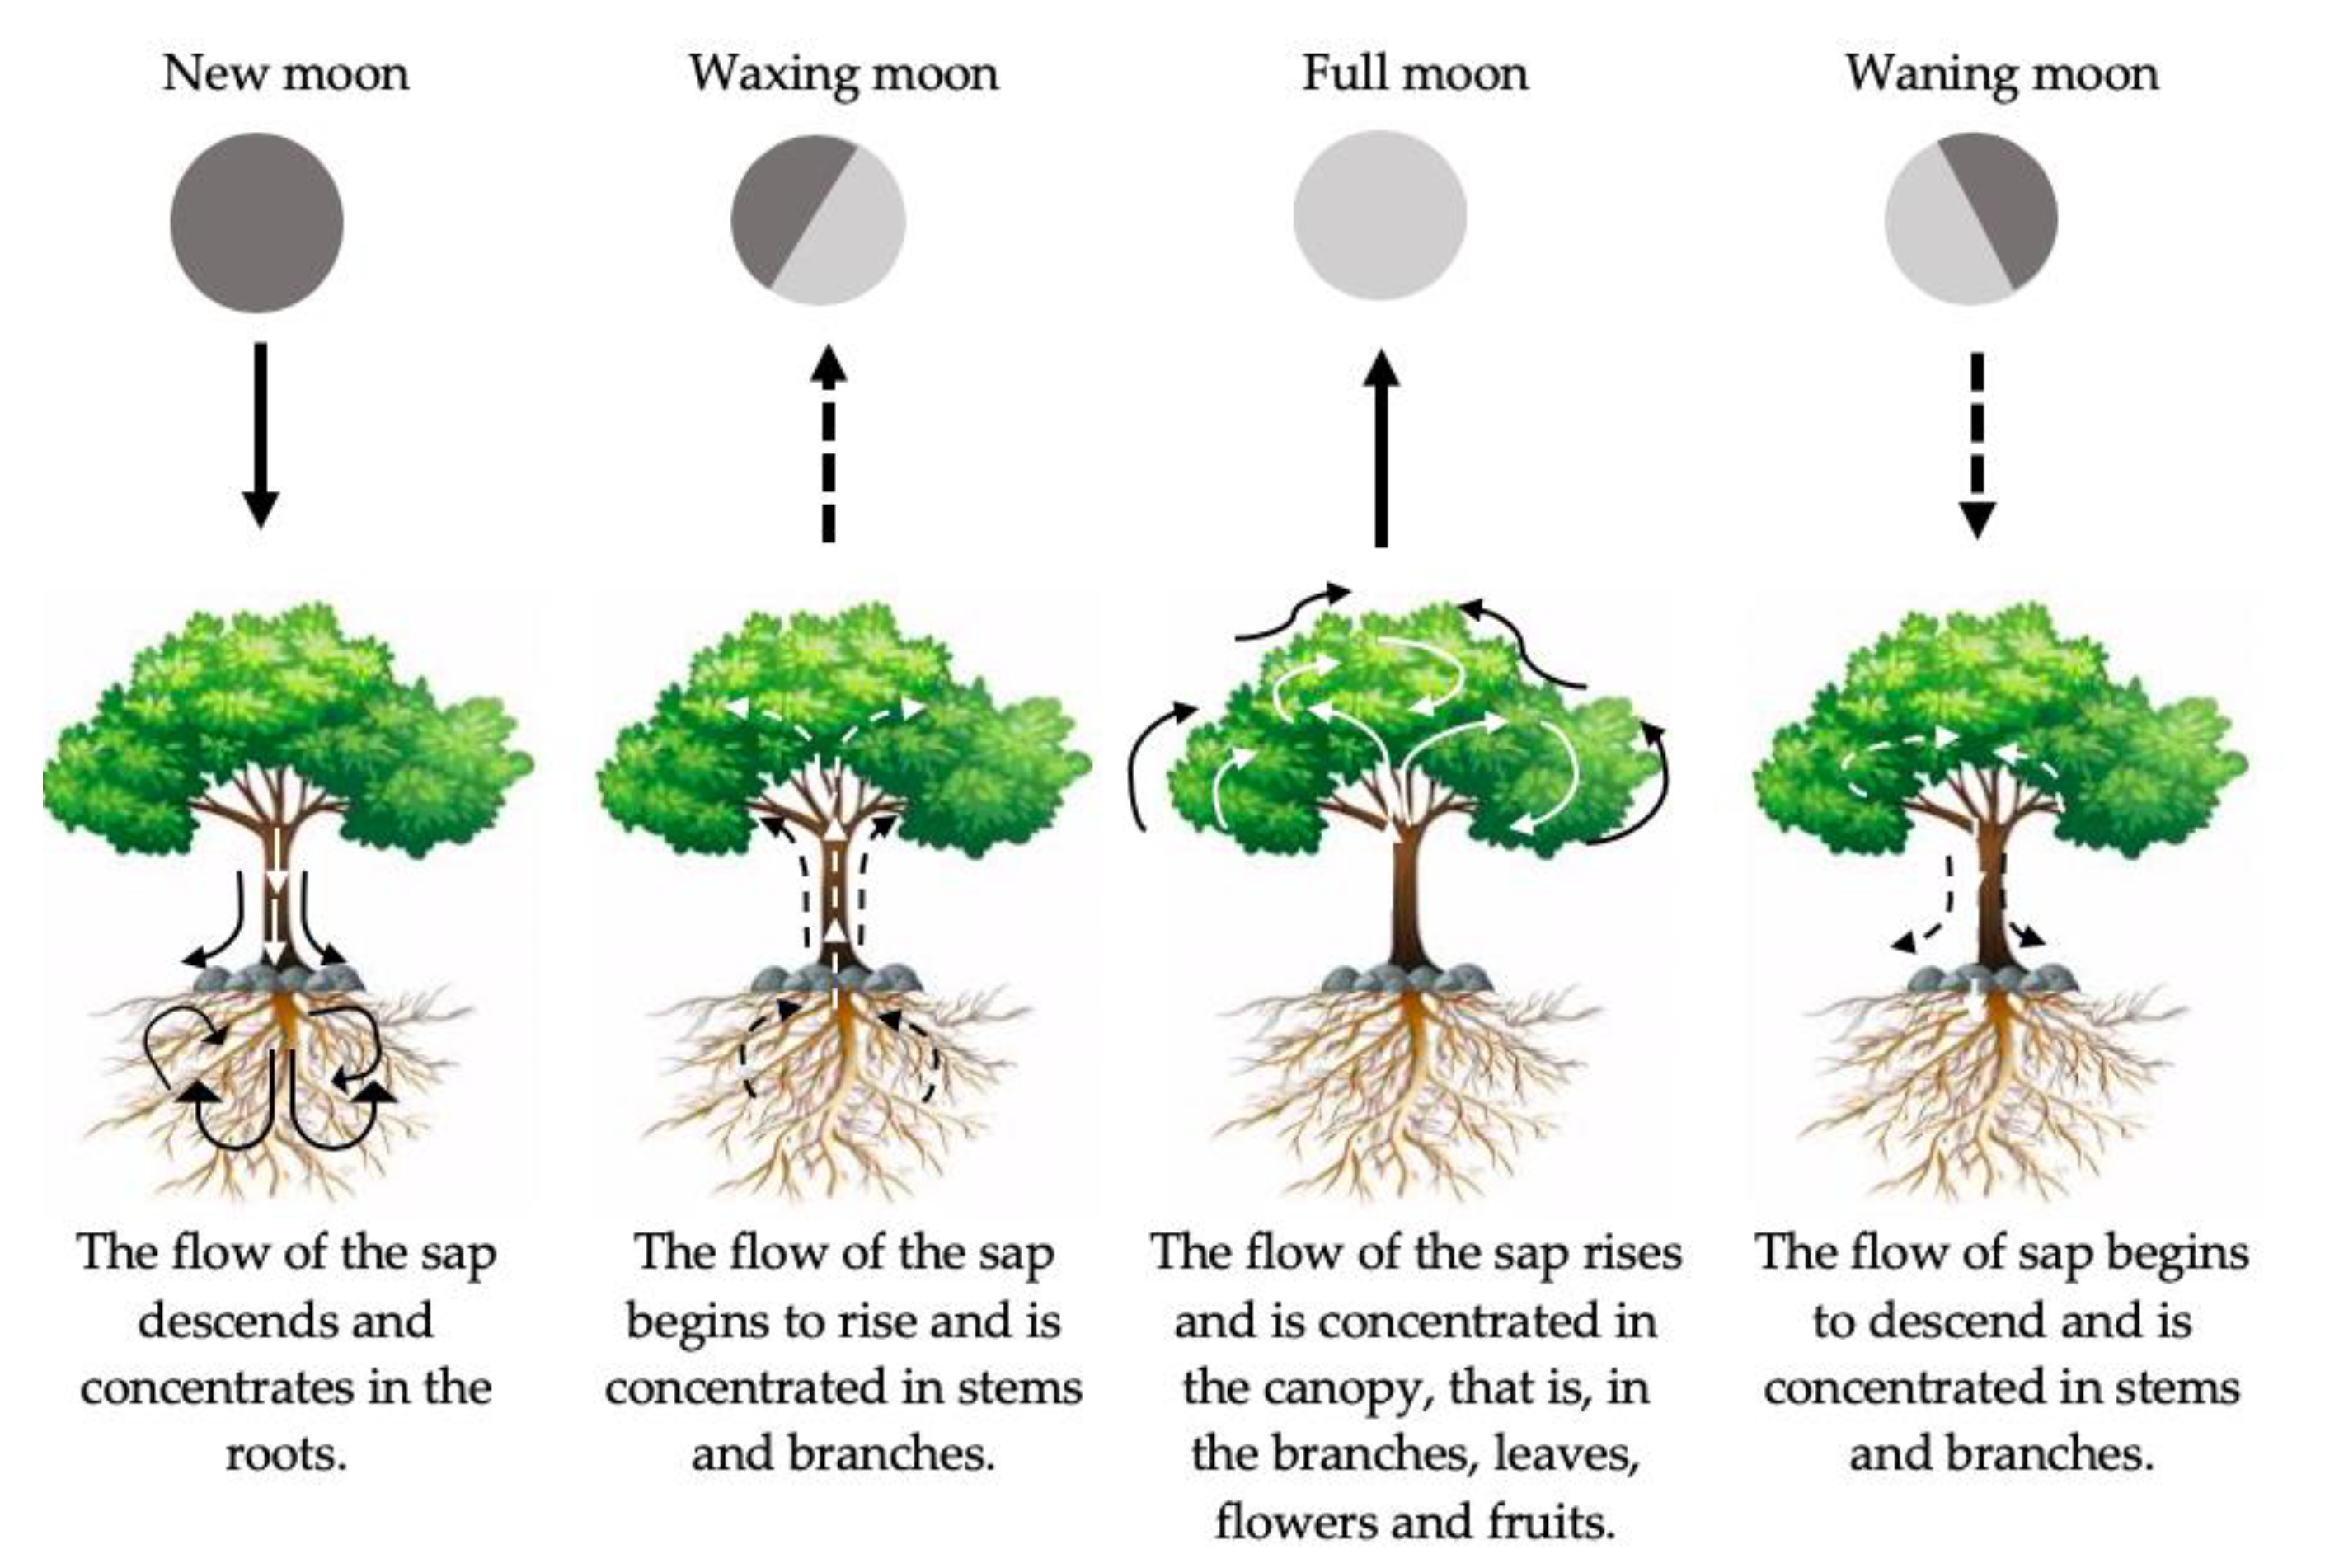 Agronomy | Free Full-Text | What Has Been Thought and Taught on the Lunar Influence on Plants in Agriculture? Perspective from Physics and Biology